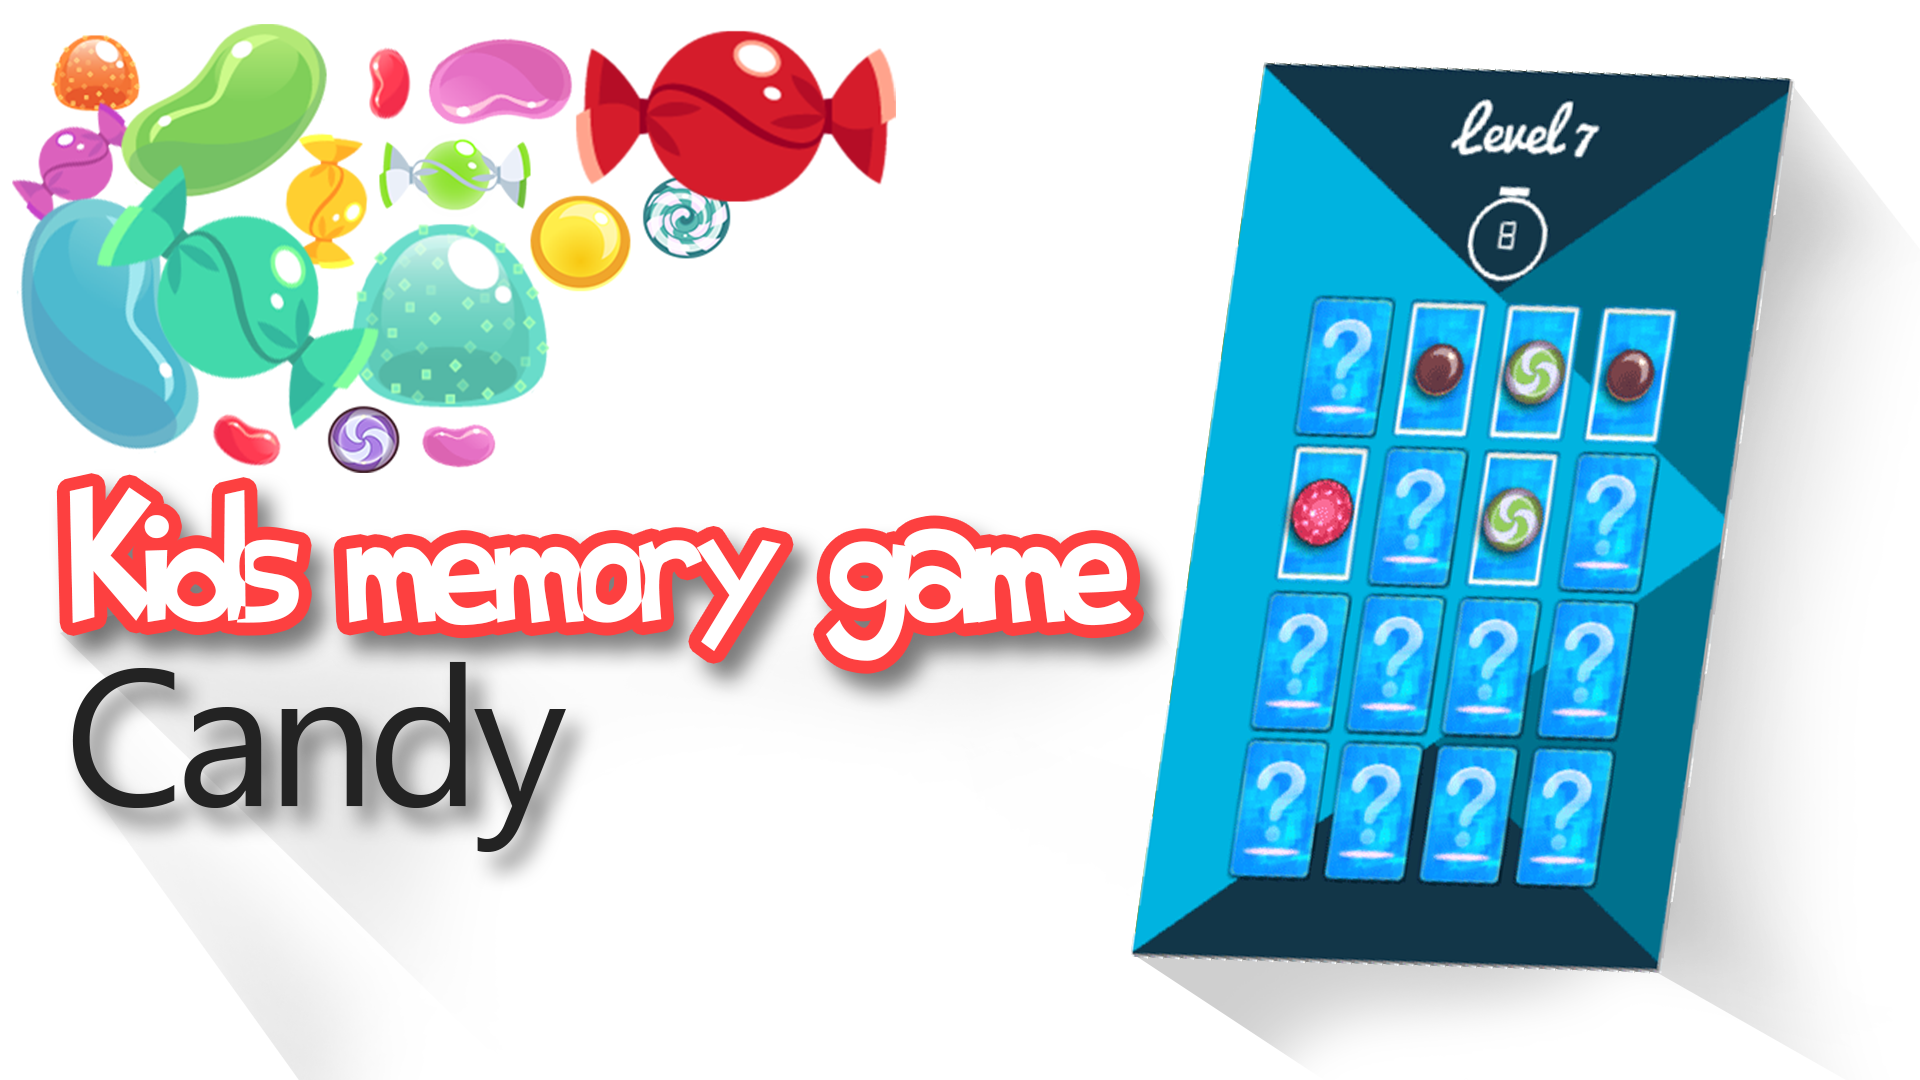 Kids memory game Candy